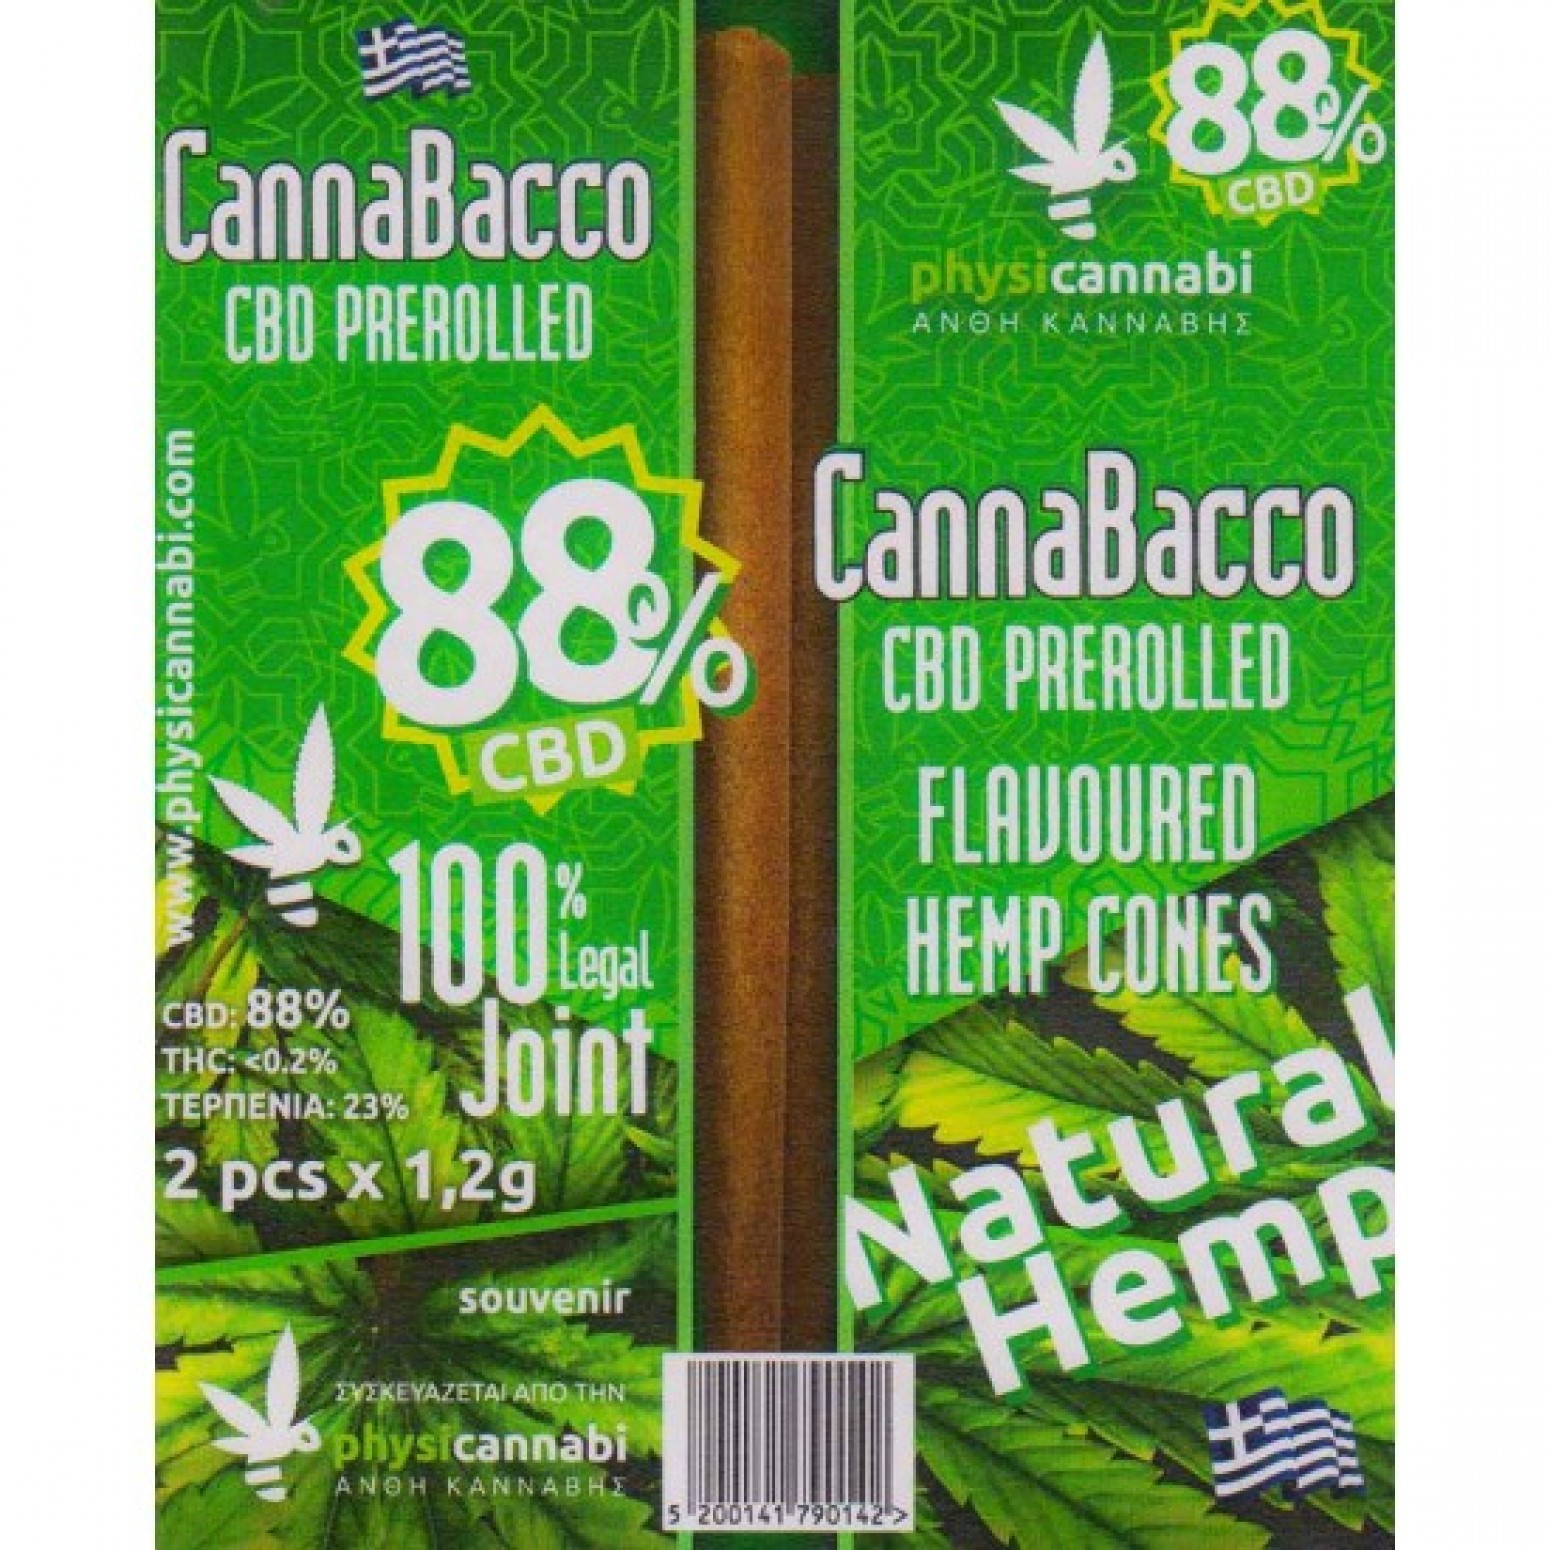 CANNABACCO - CBD PREROLLED FLAVOURED HEMP CONES Natural